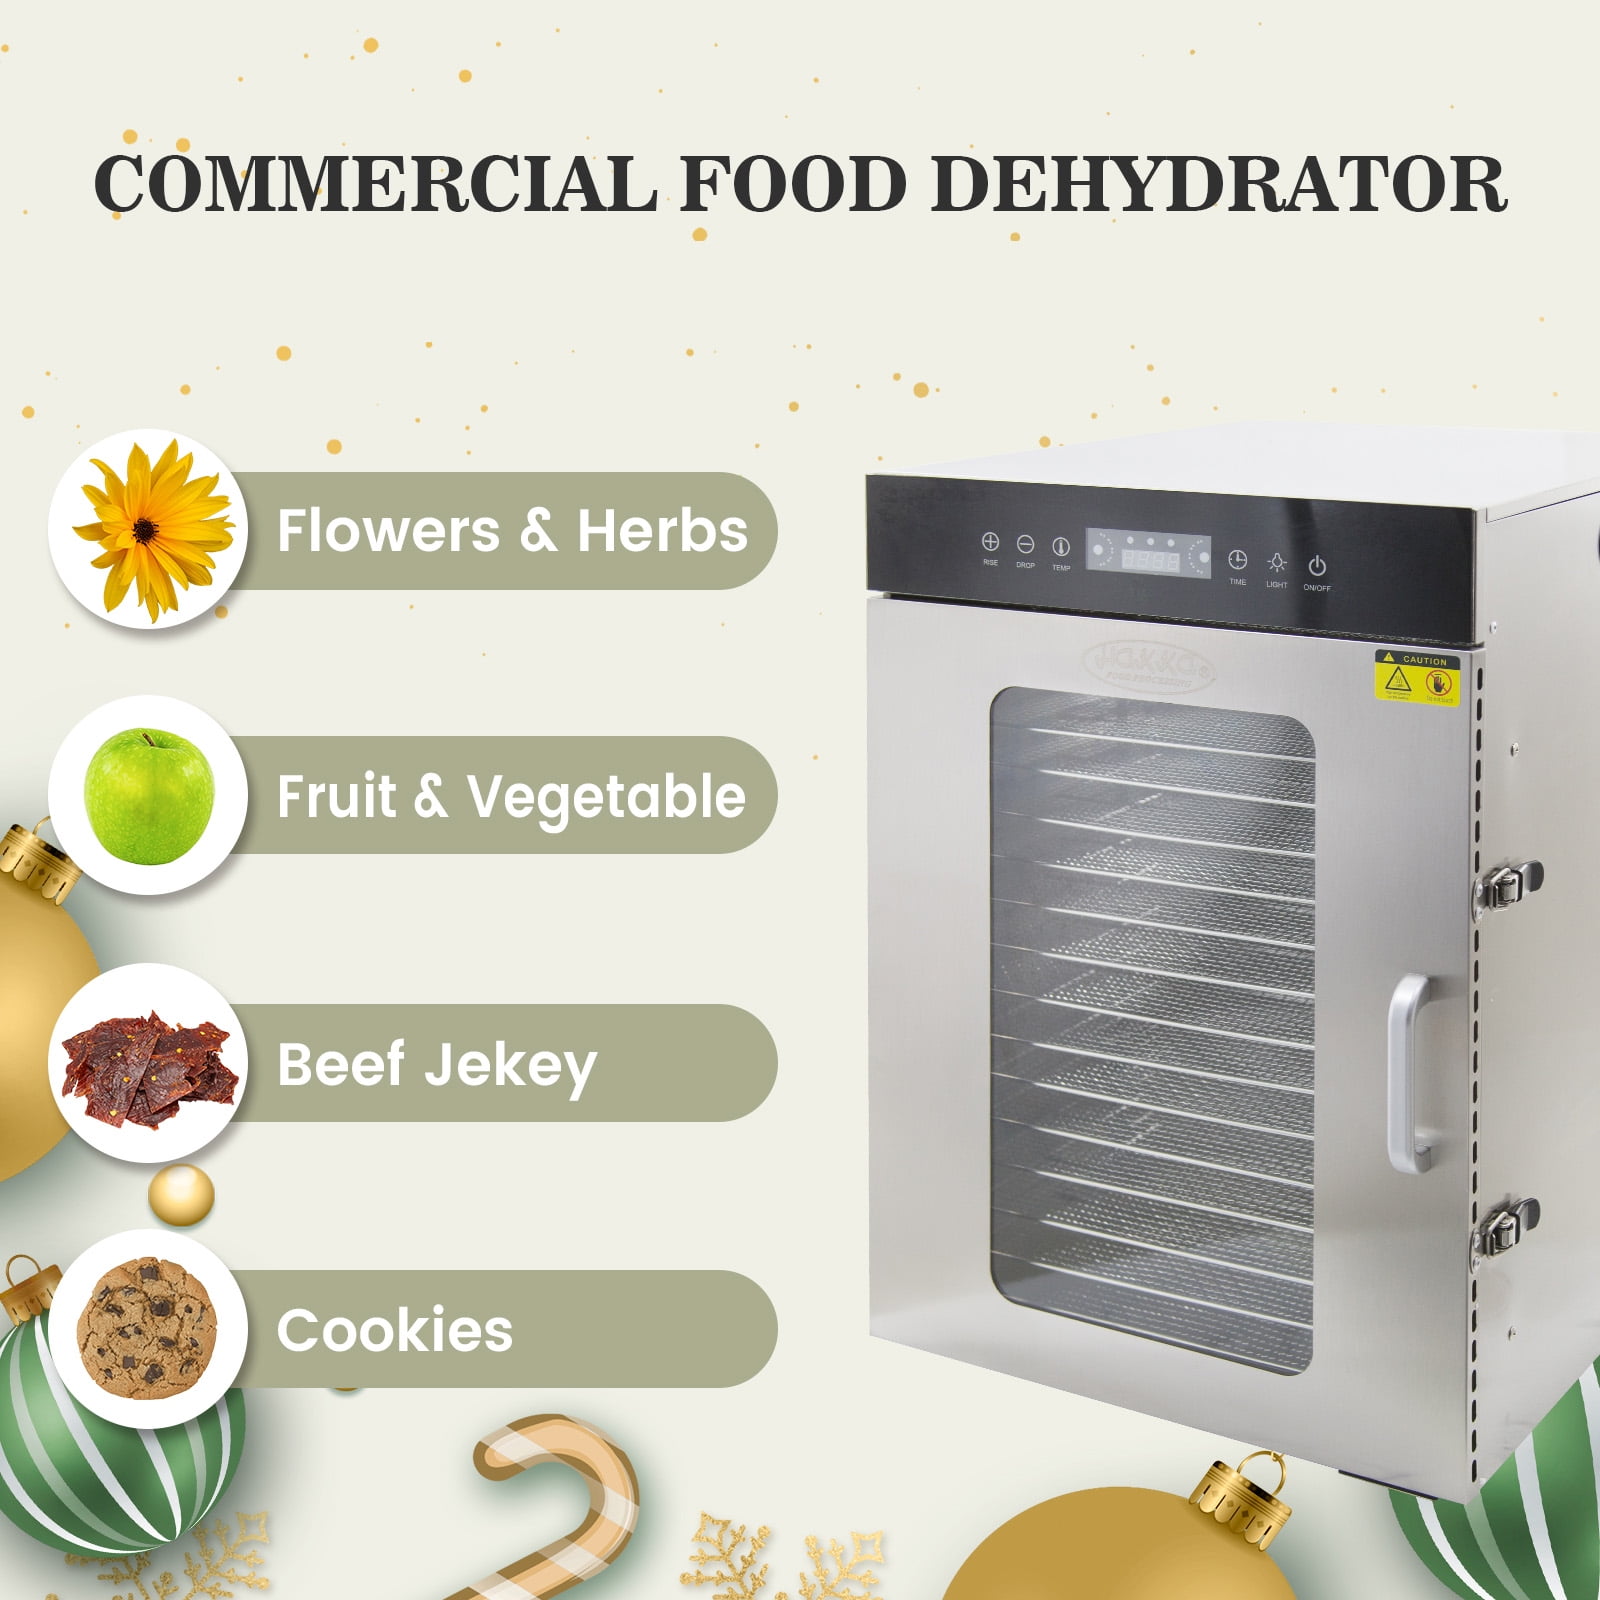 Food Dehydrator (DHR-20) Demo, Healthier snacking is easy when you know  exactly what is in your snacks! Make your own jerky, dried nuts, fruit  rollups, and more in our Food Dehydrator!